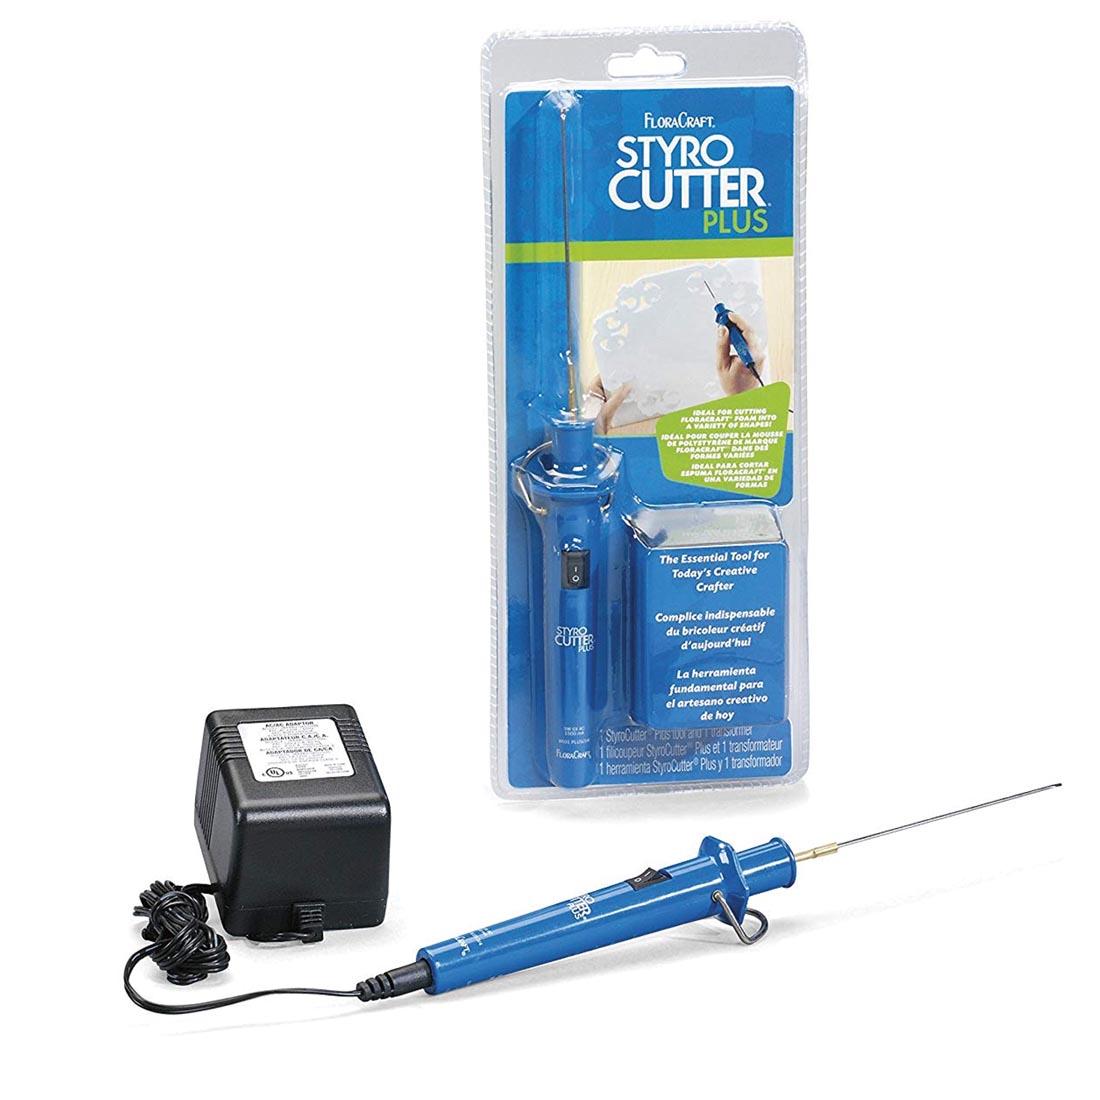 Styro Cutter Plus inside and out of package